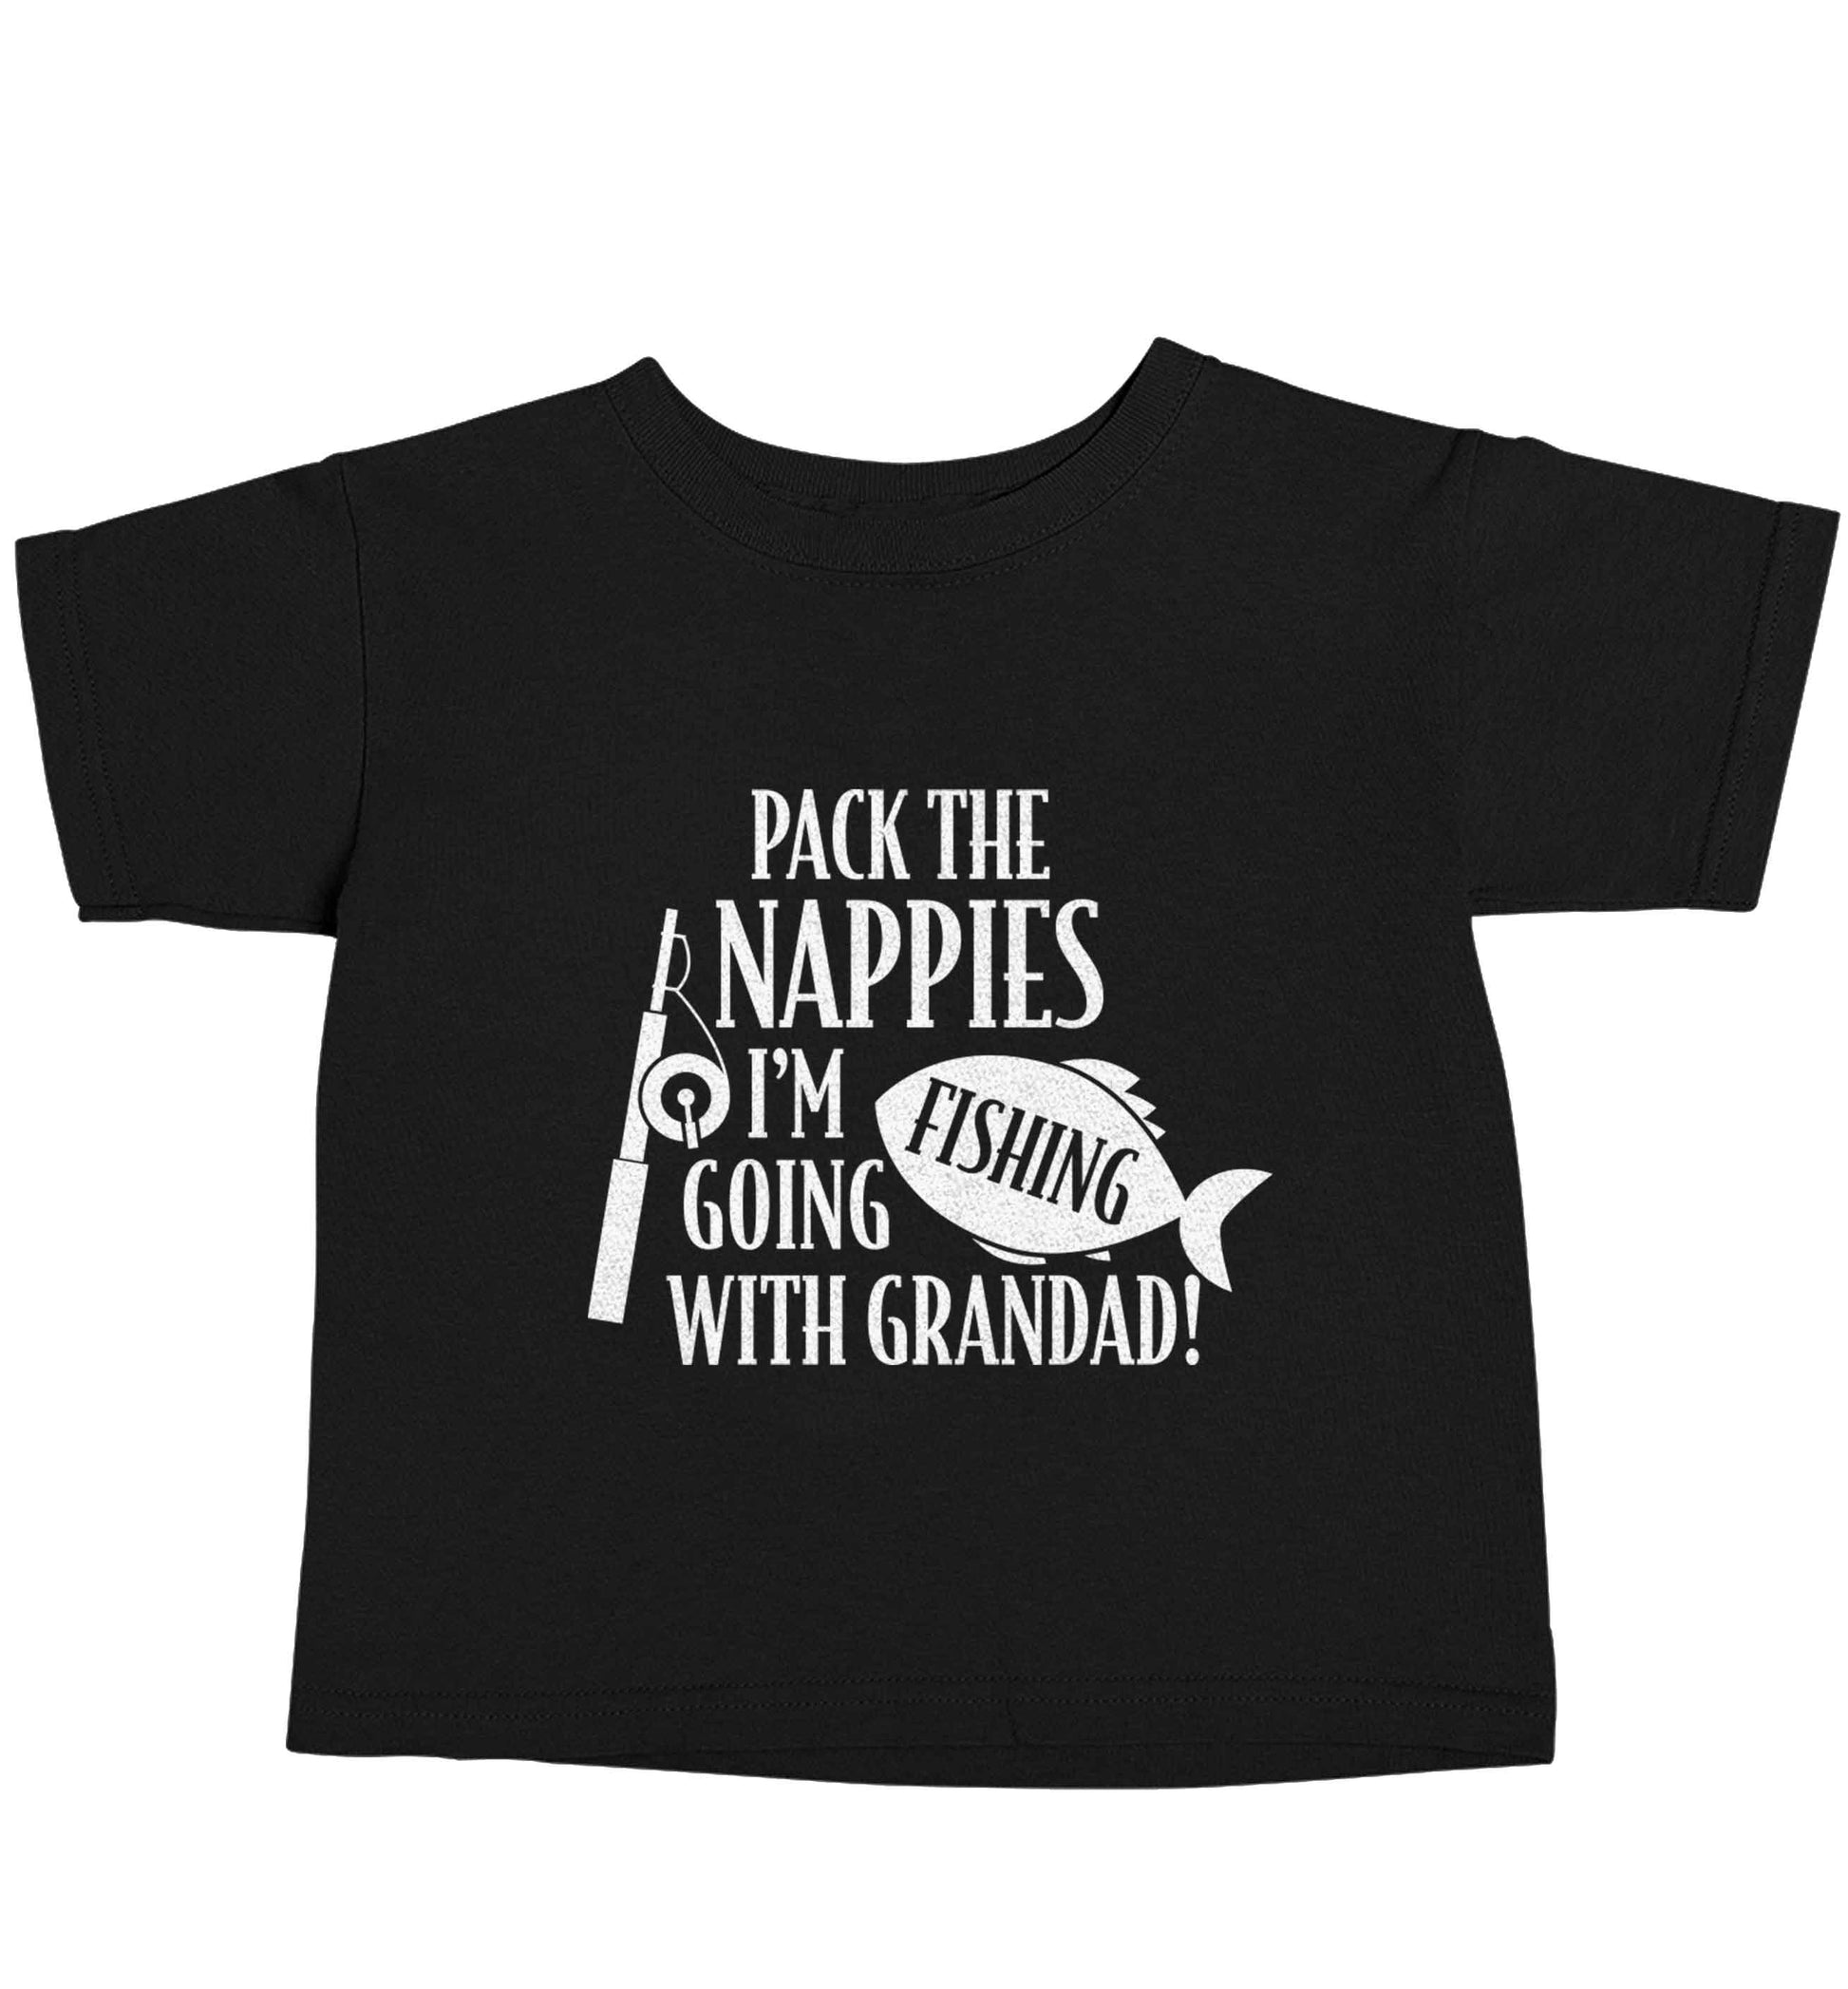 Pack the nappies I'm going fishing with Grandad Black baby toddler Tshirt 2 years